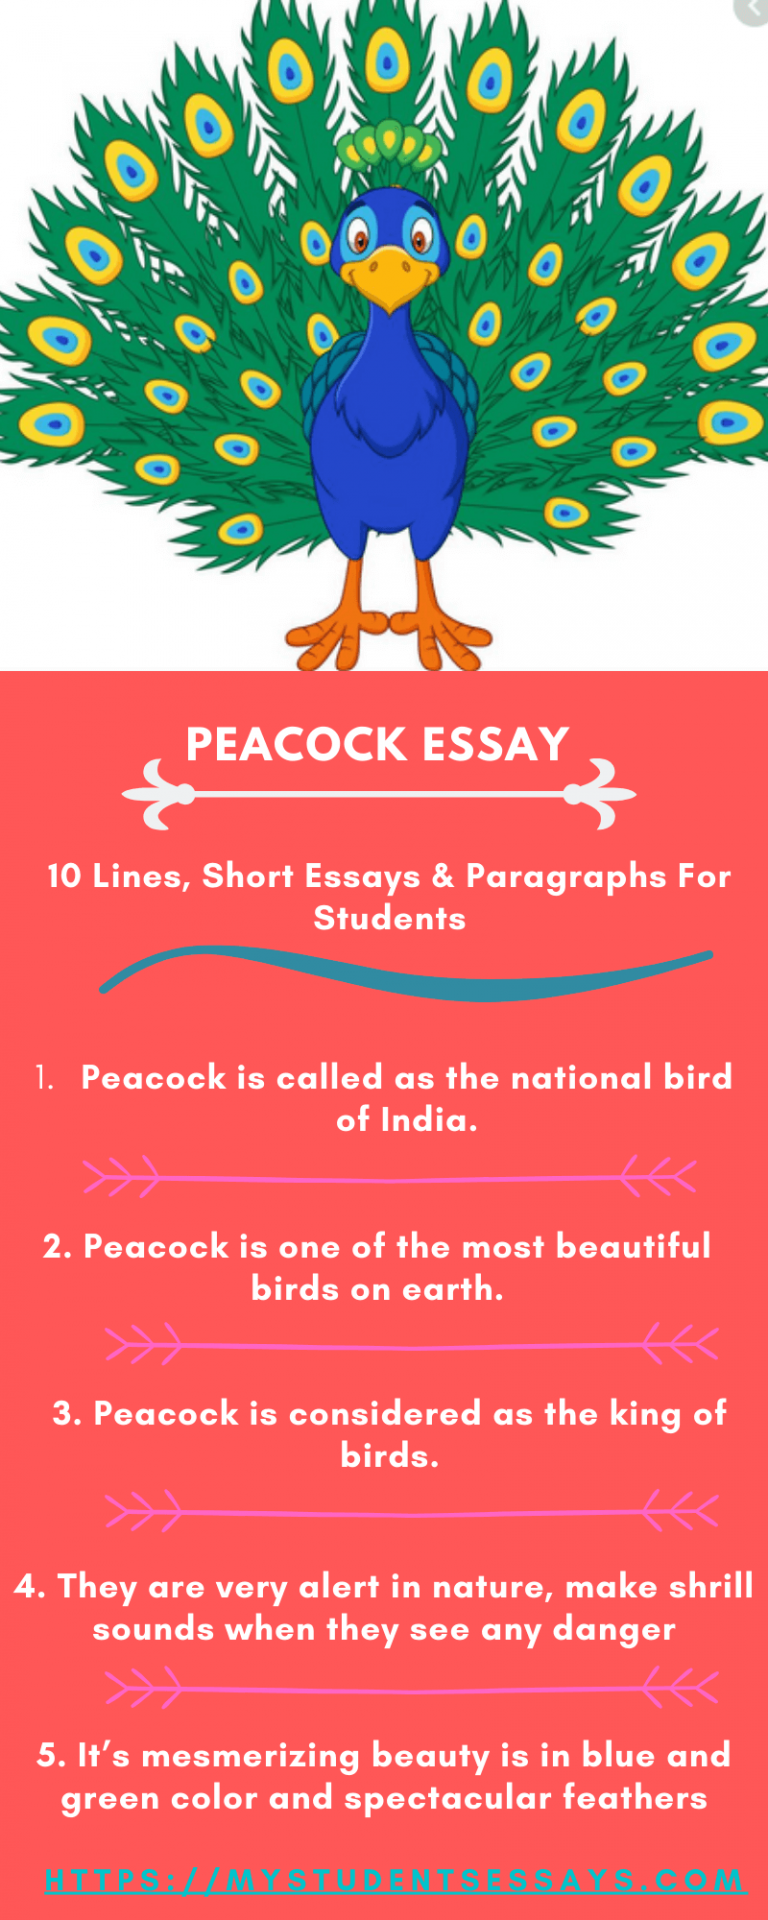 peacock essay in english for class 8